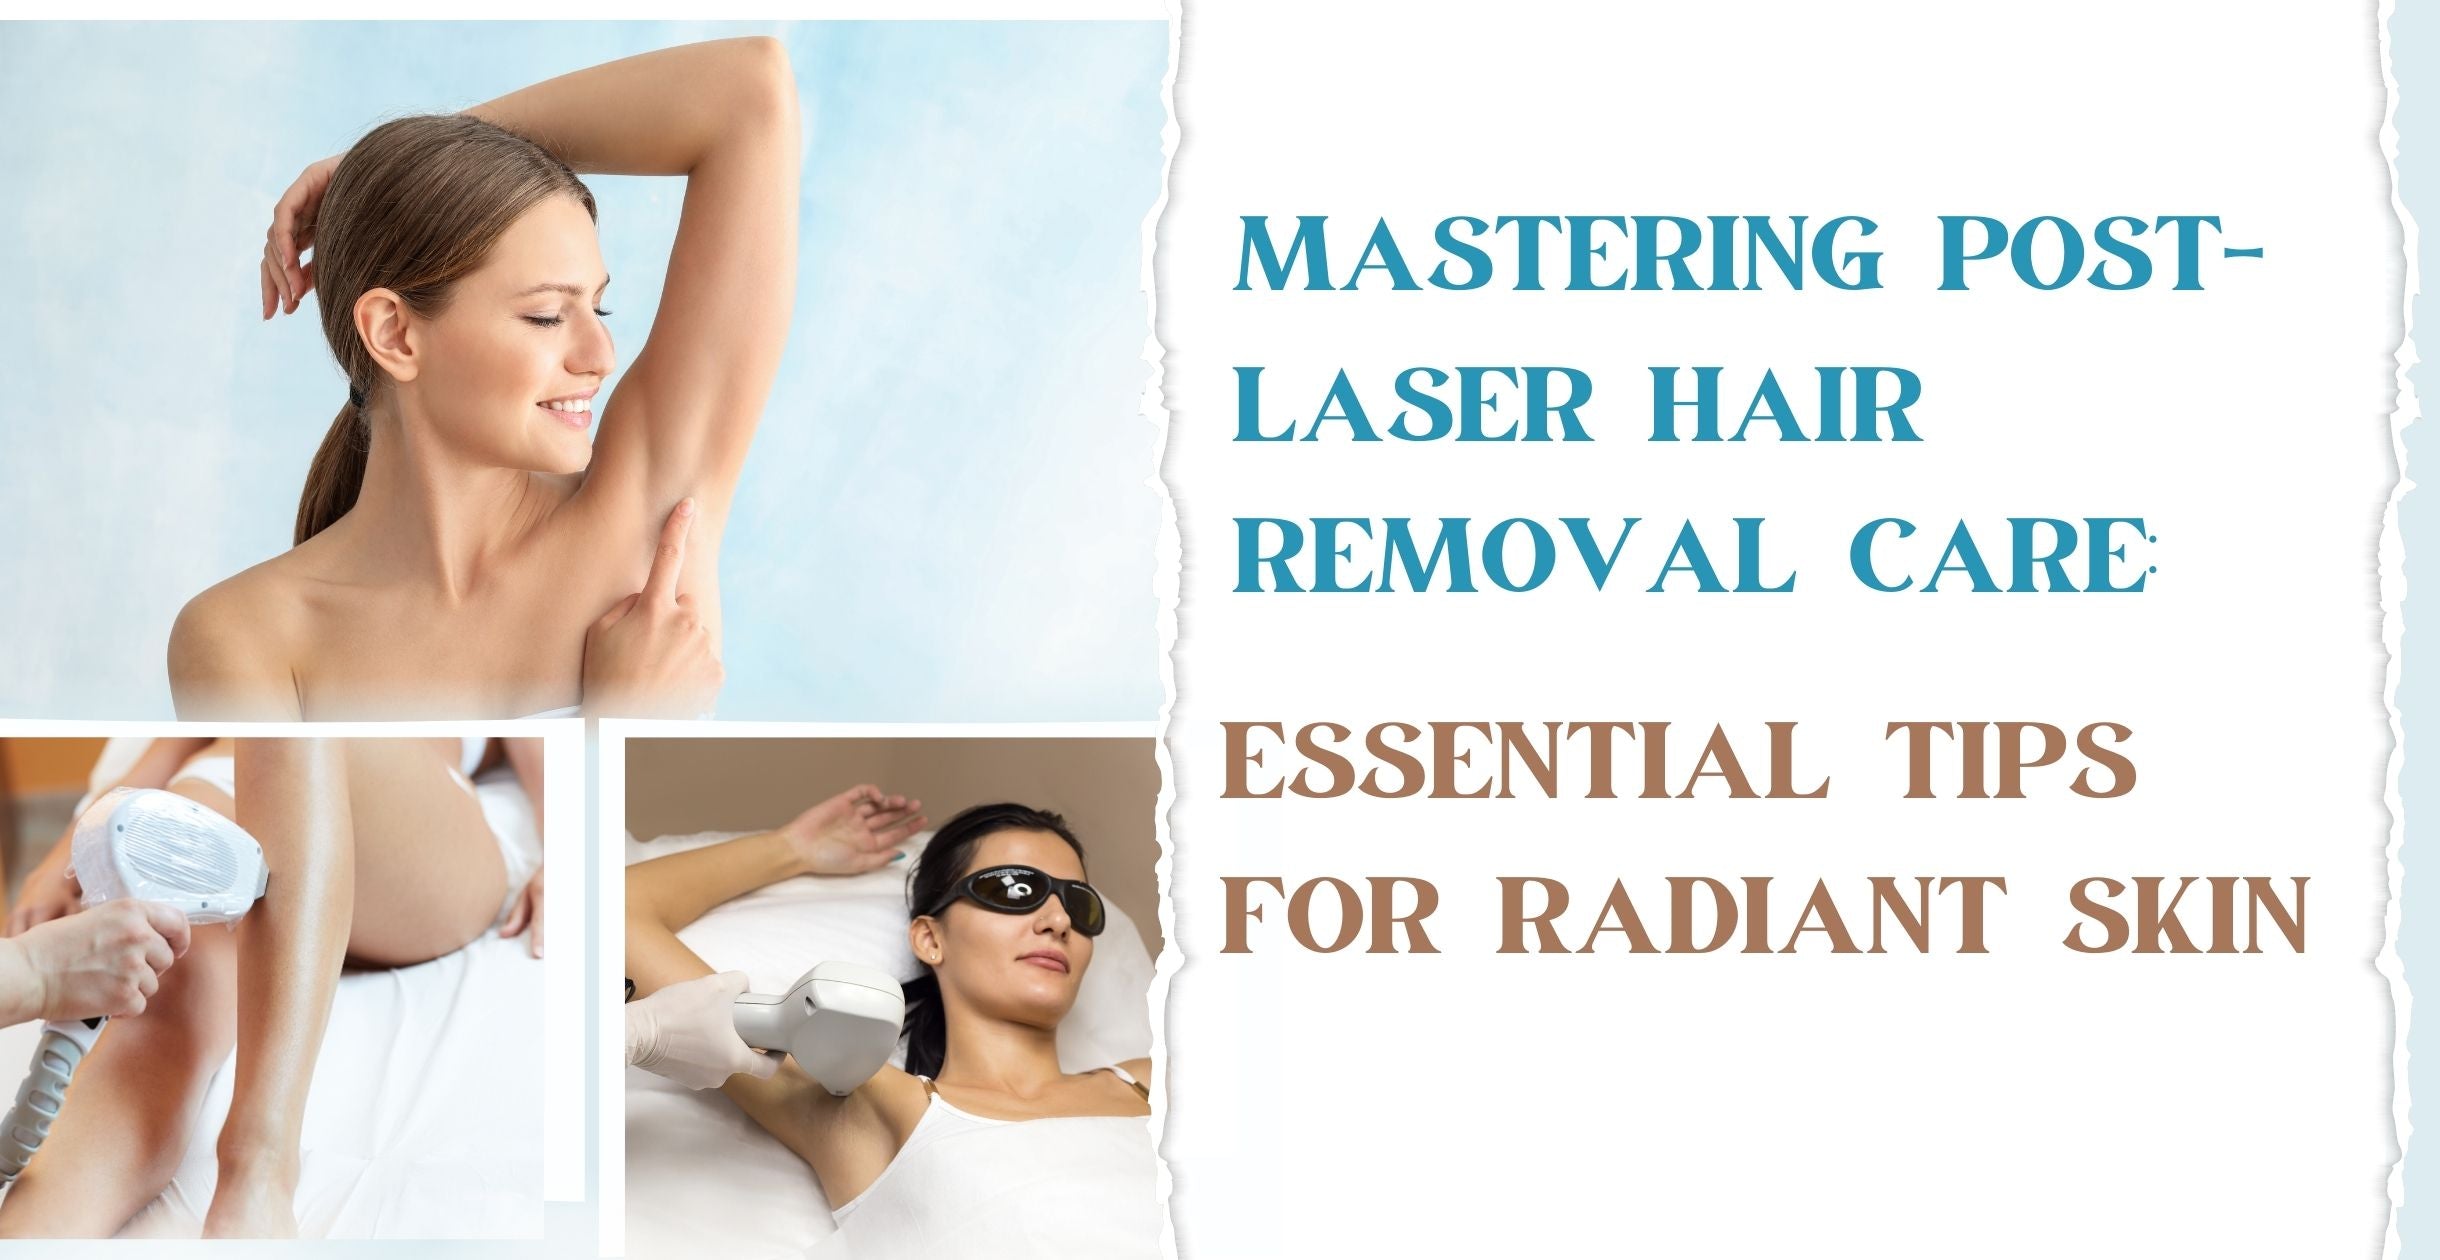 Mastering Post-Laser Hair Removal Care: Essential Tips for Radiant Skin